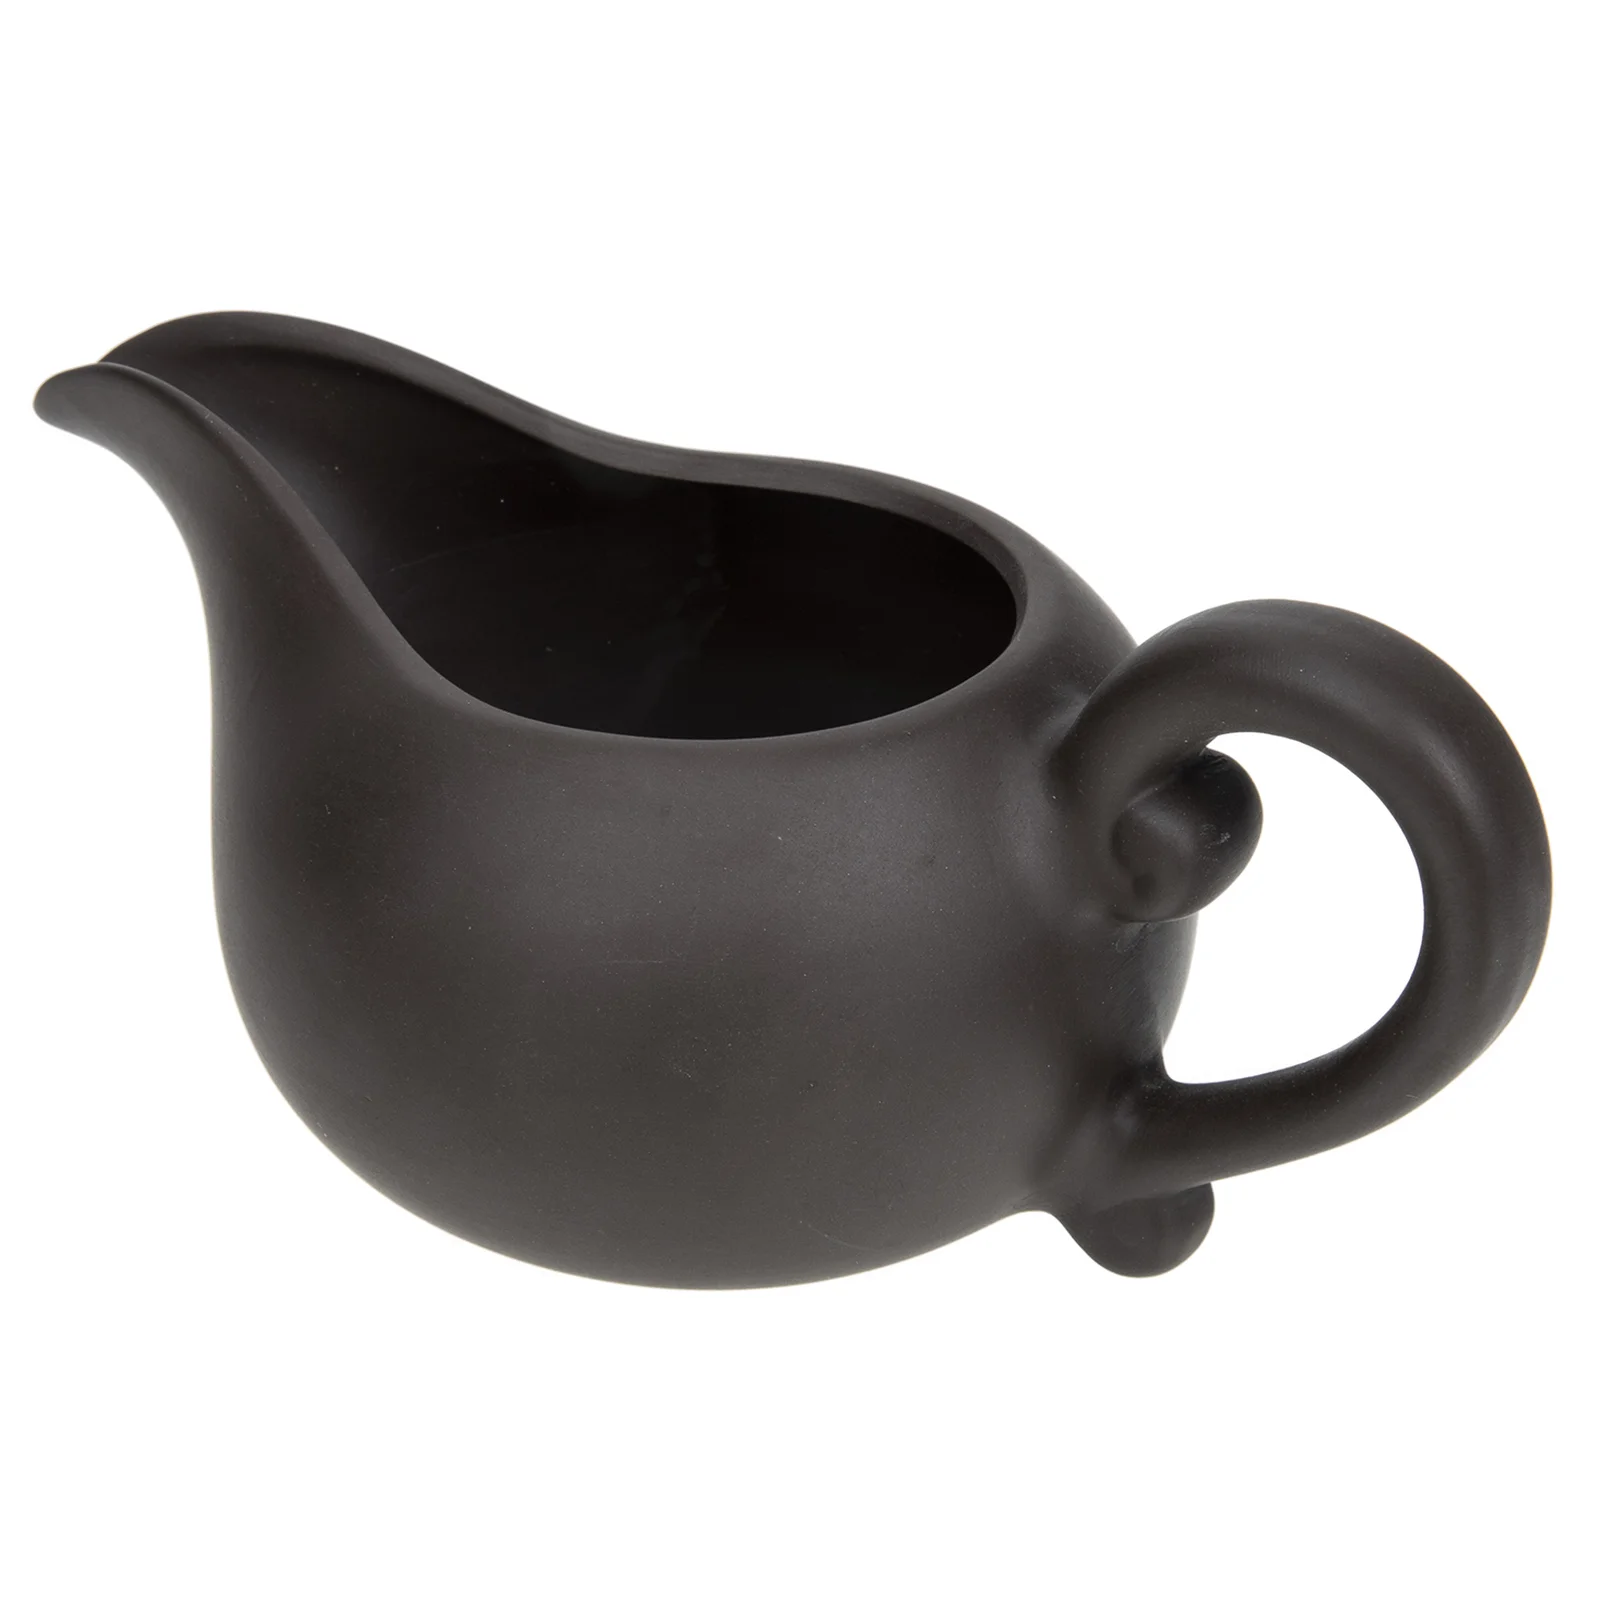 

Pitcher Creamer Sauce Ceramic Jug Gravy Coffee Boat Pourer Cup Syrup Tea Mini Frothing Serving Dressing Salad Container